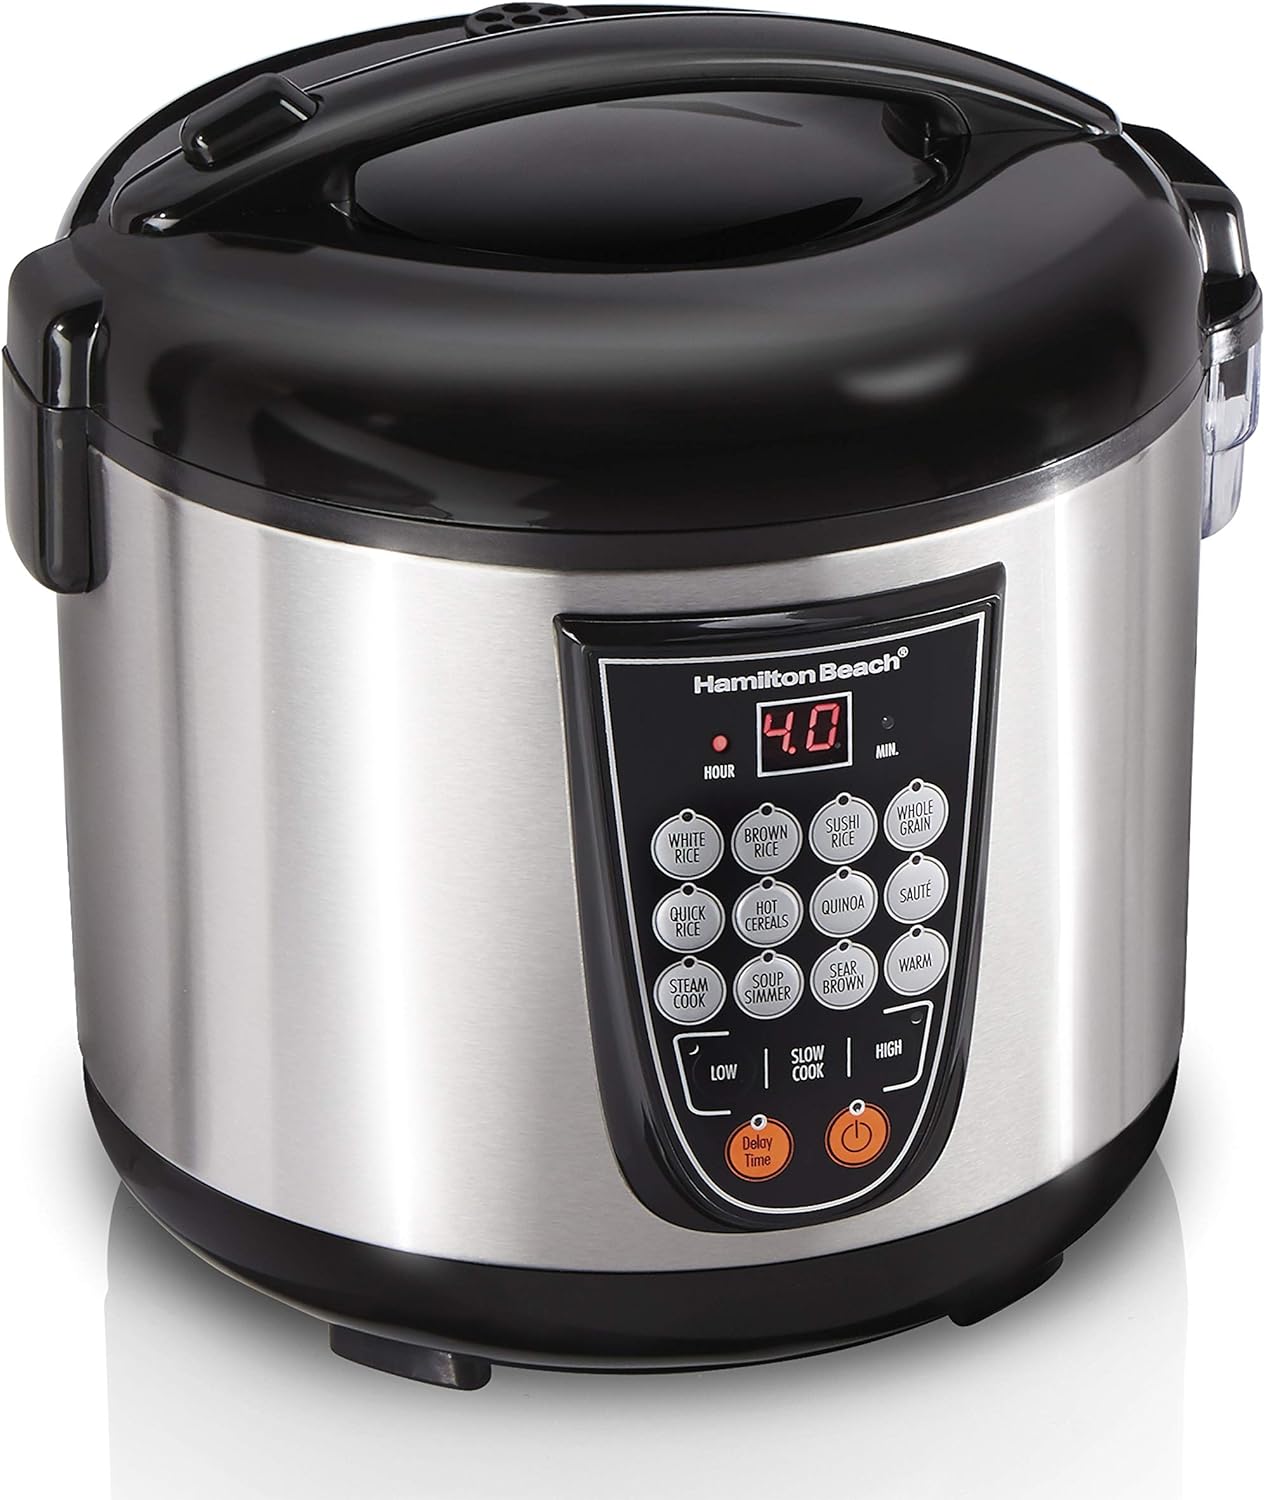 Hamilton Beach 12-in-1 QuikCook Pressure Cooker with True Slow Cook Technology, Rice  Digital Programmable Rice and Slow Cooker  Food Steamer, 20 Cups Cooked